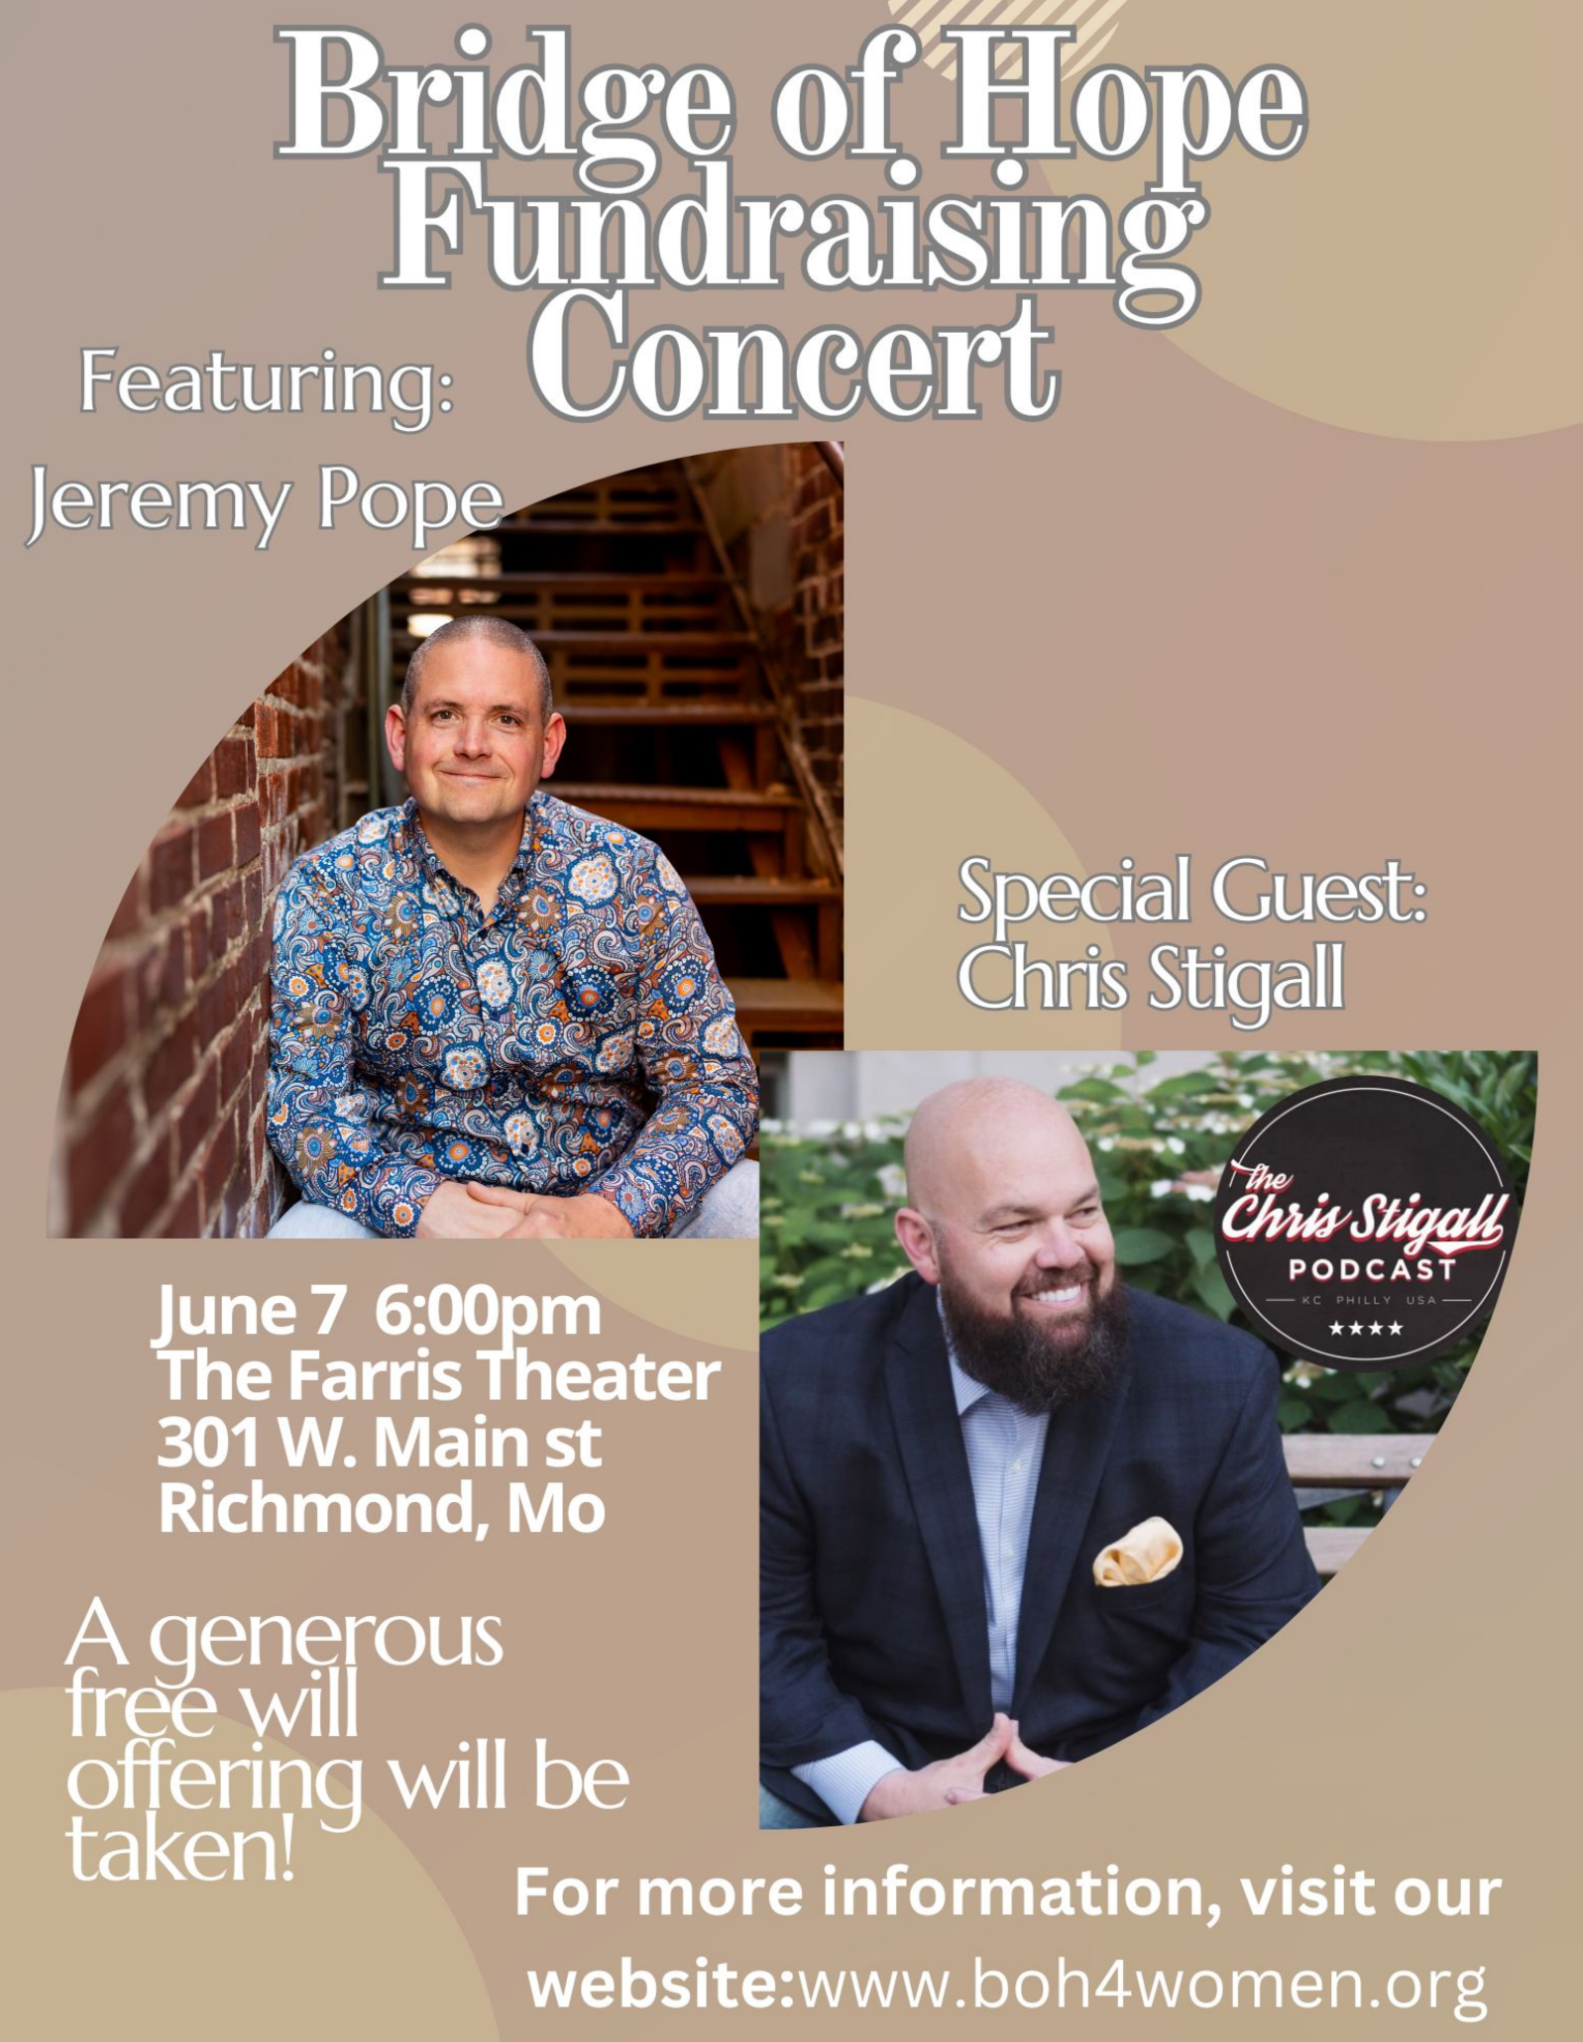 Fundraising Concert featuring Jeremy Pope